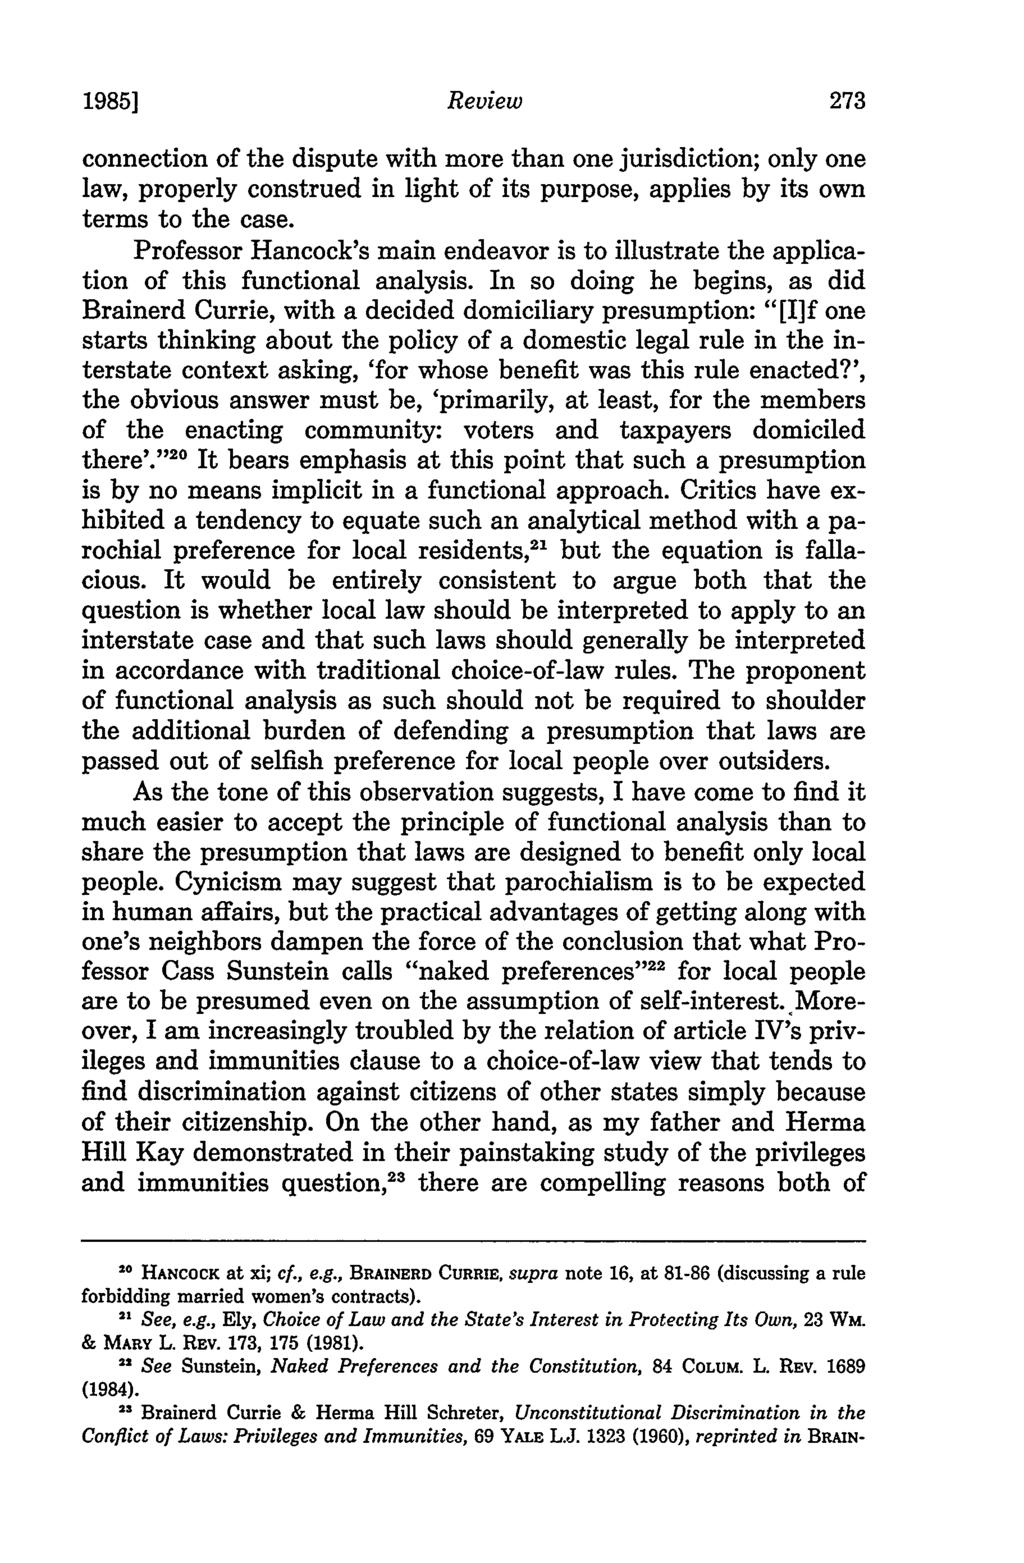 1985] Review connection of the dispute with more than one jurisdiction; only one law, properly construed in light of its purpose, applies by its own terms to the case.